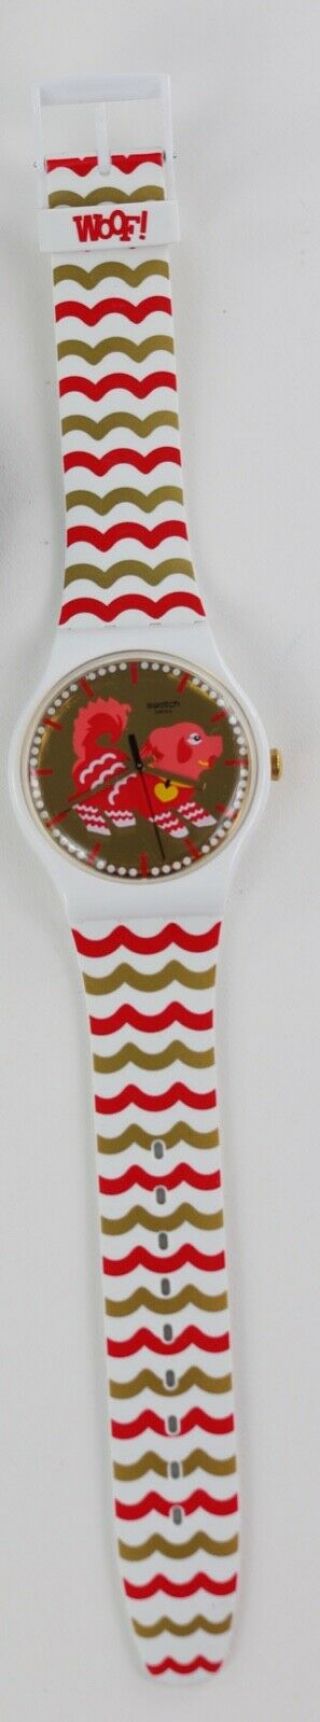 Swatch Watch " Woof " Chinese Year 2018 Special Edition Rare Euc Usa Seller